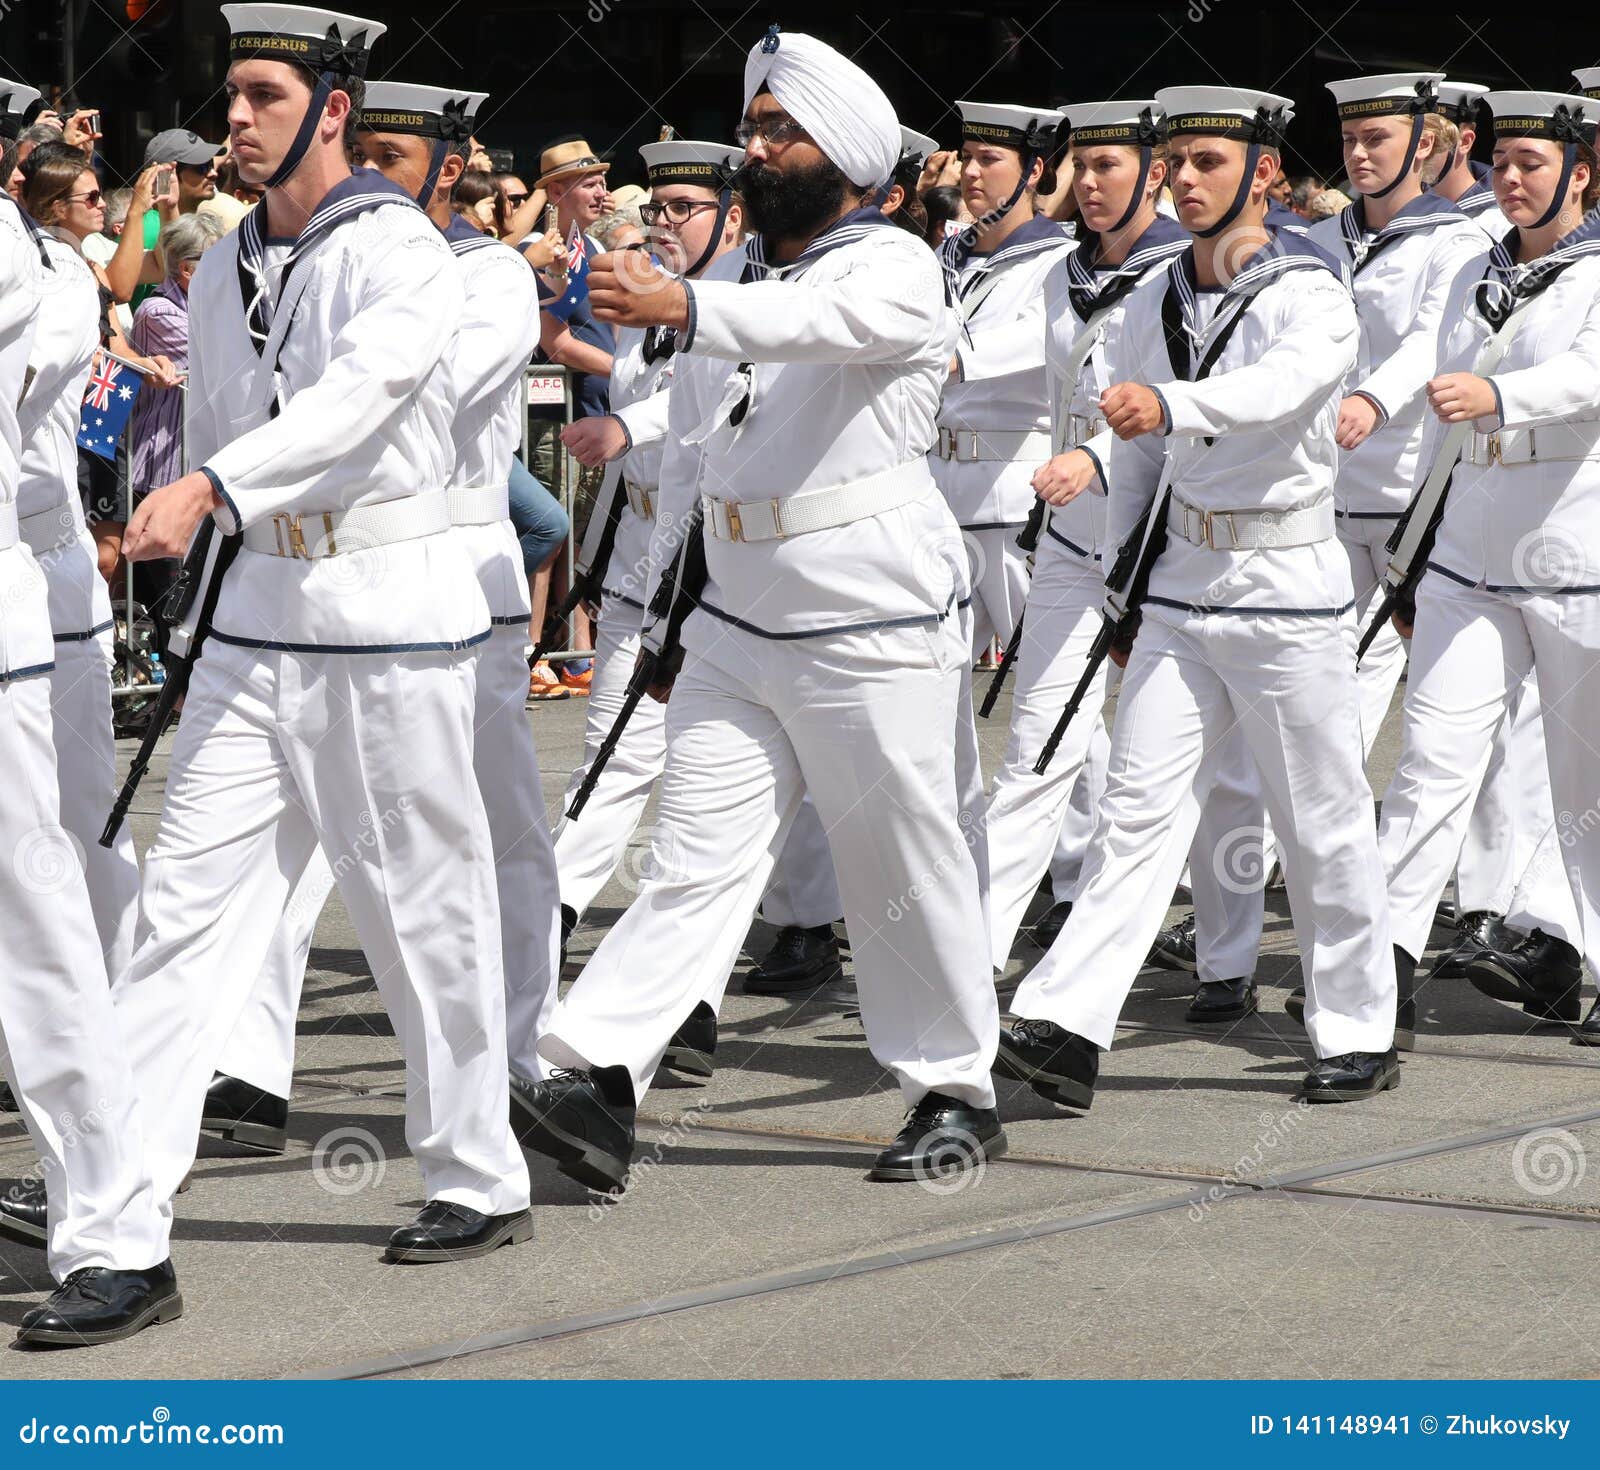 strømper vitamin købmand Royal Australian Navy Marching during 2019 Australia Day Parade in  Melbourne Editorial Photo - Image of aussie, event: 141148941